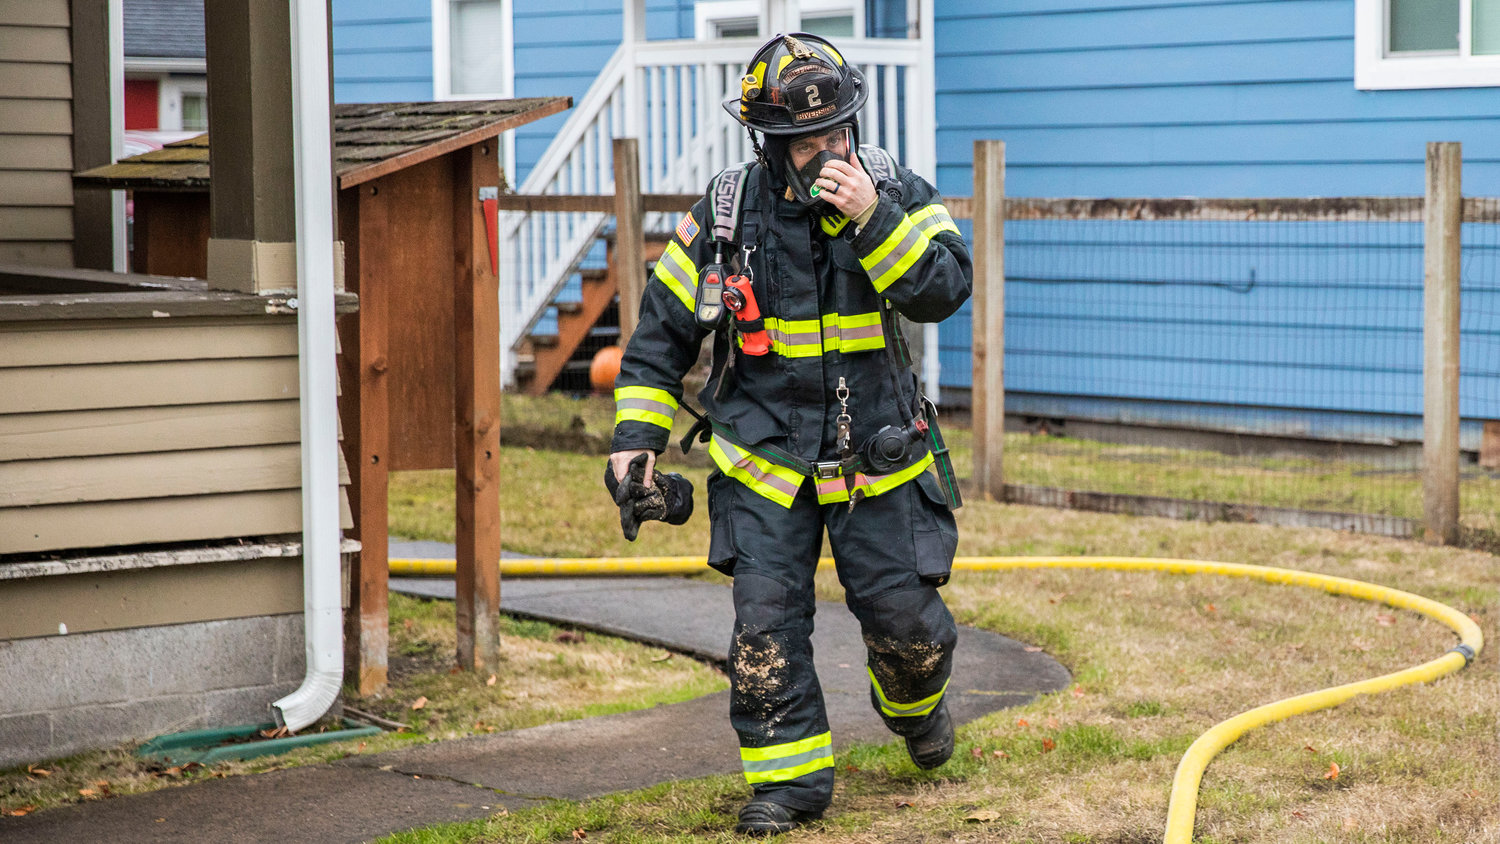 A Riverside firefighter adjusts his mask while responding to a residential fire in the 200 block of North Rock Street in Centralia on Friday.